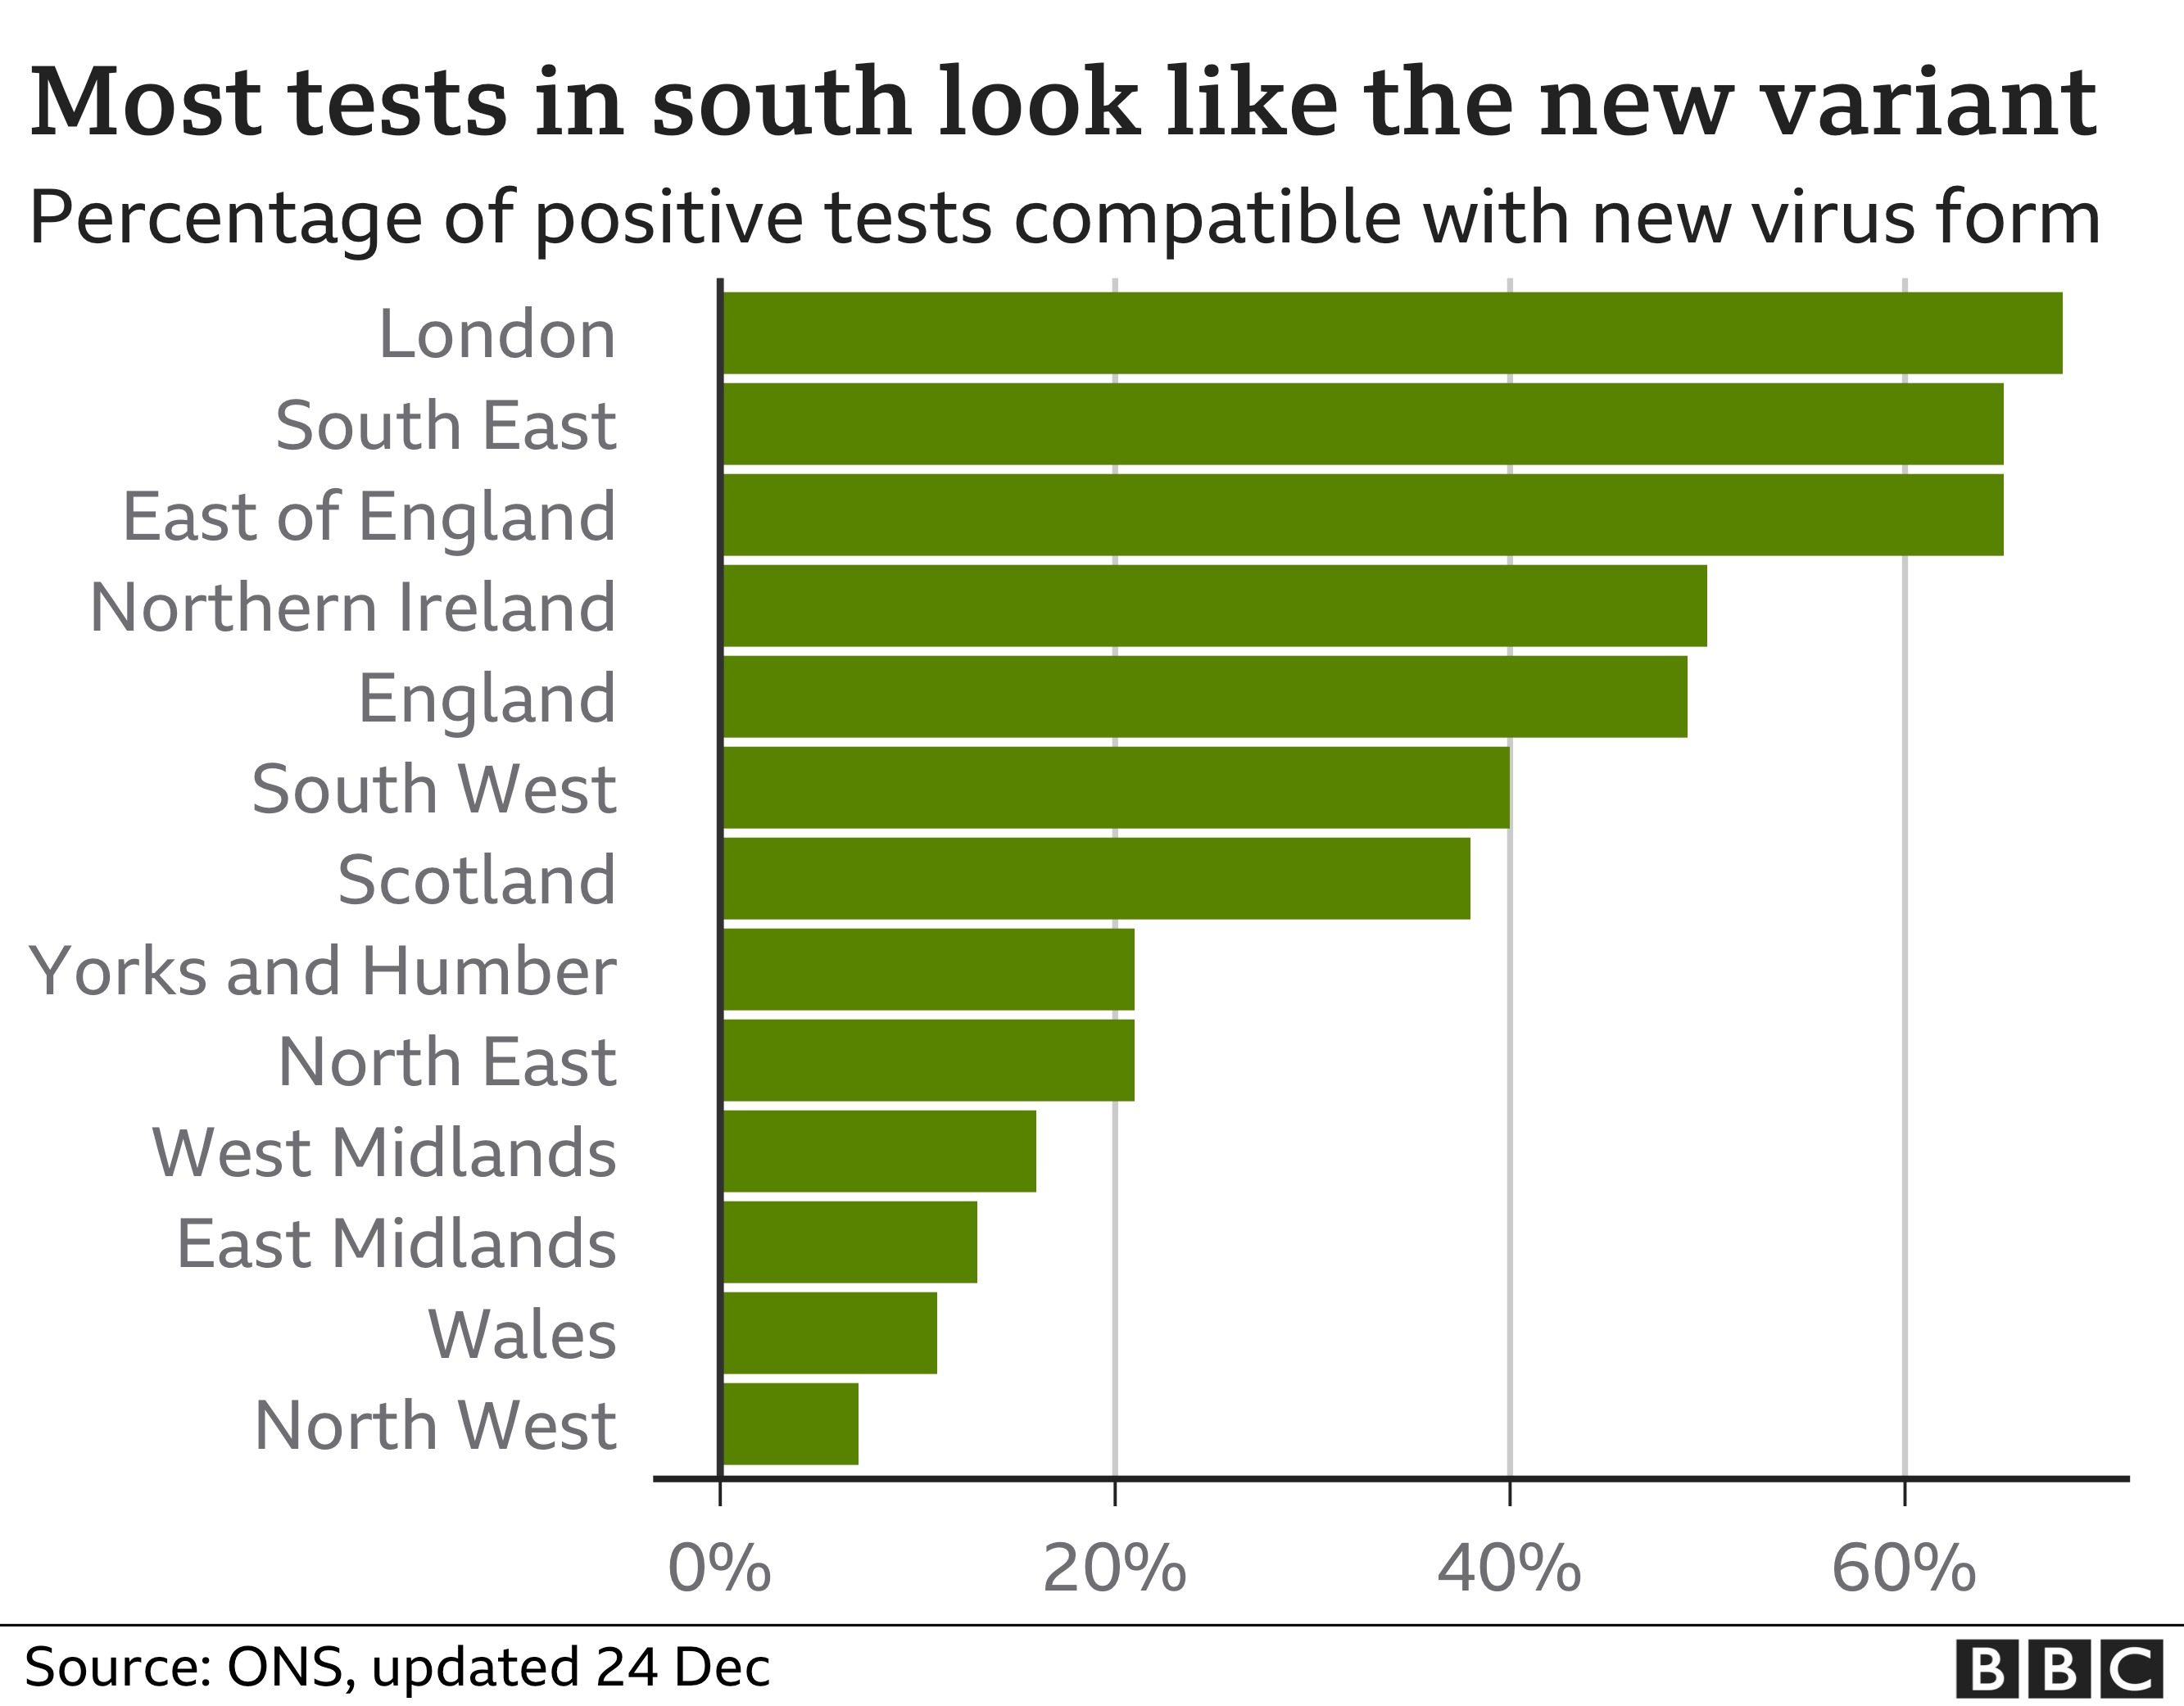 Most positive tests in south of England looks like the new variant